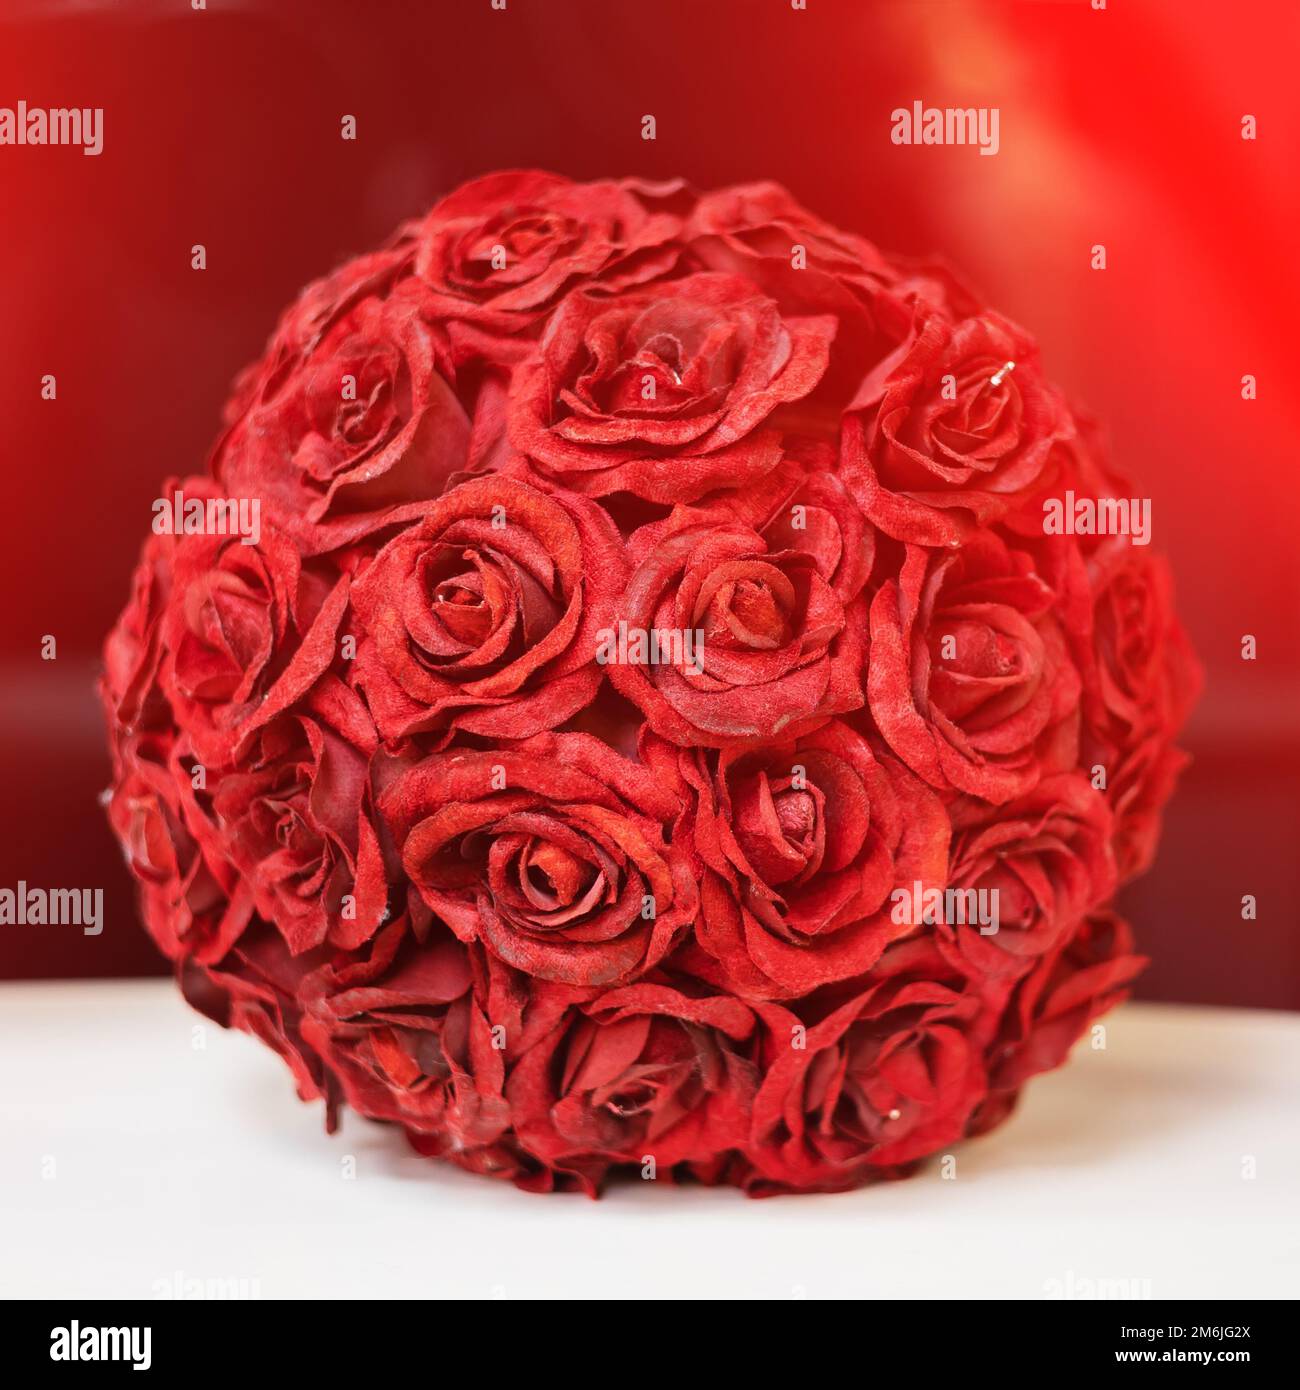 A decorative ball of red rose buds stands on a white surface on a red background Stock Photo